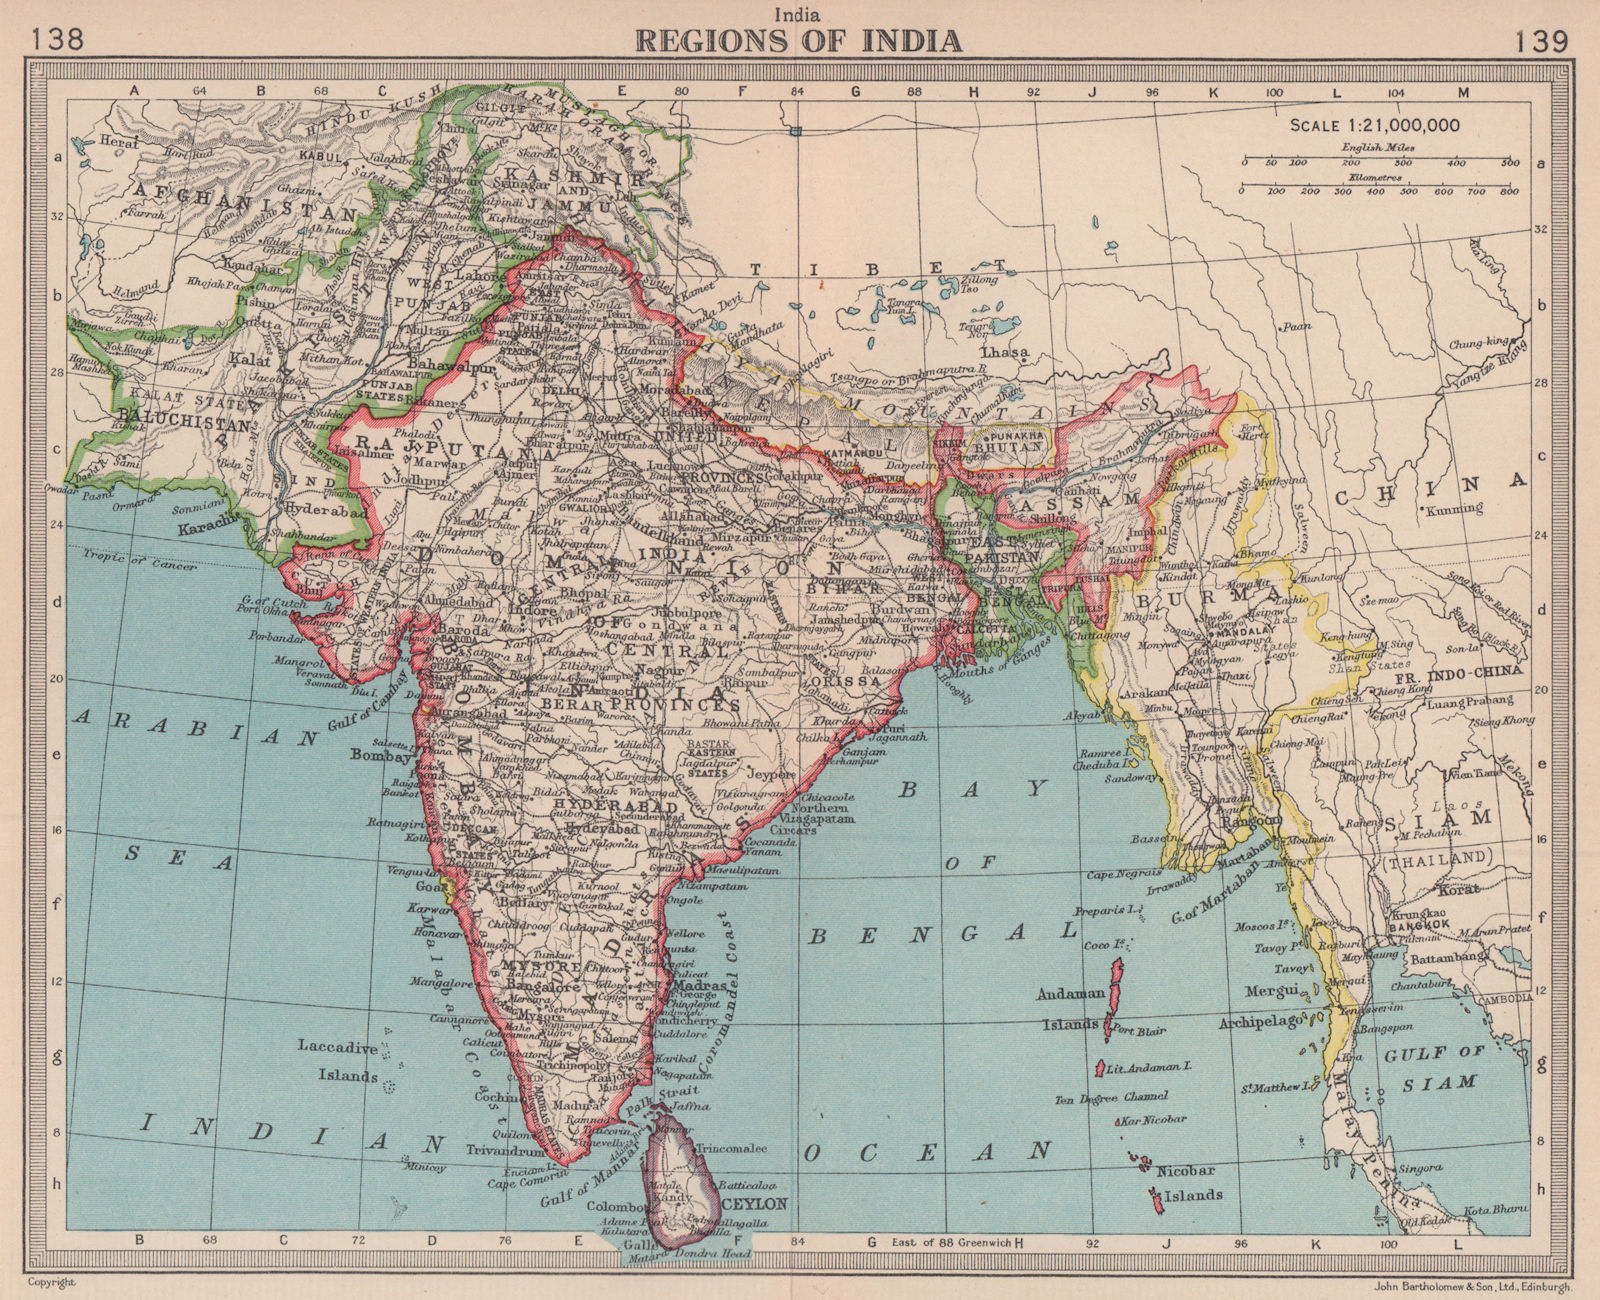 Newly partitioned India East Pakistan Burma. Unresolved Jammu & Kashmir 1949 map